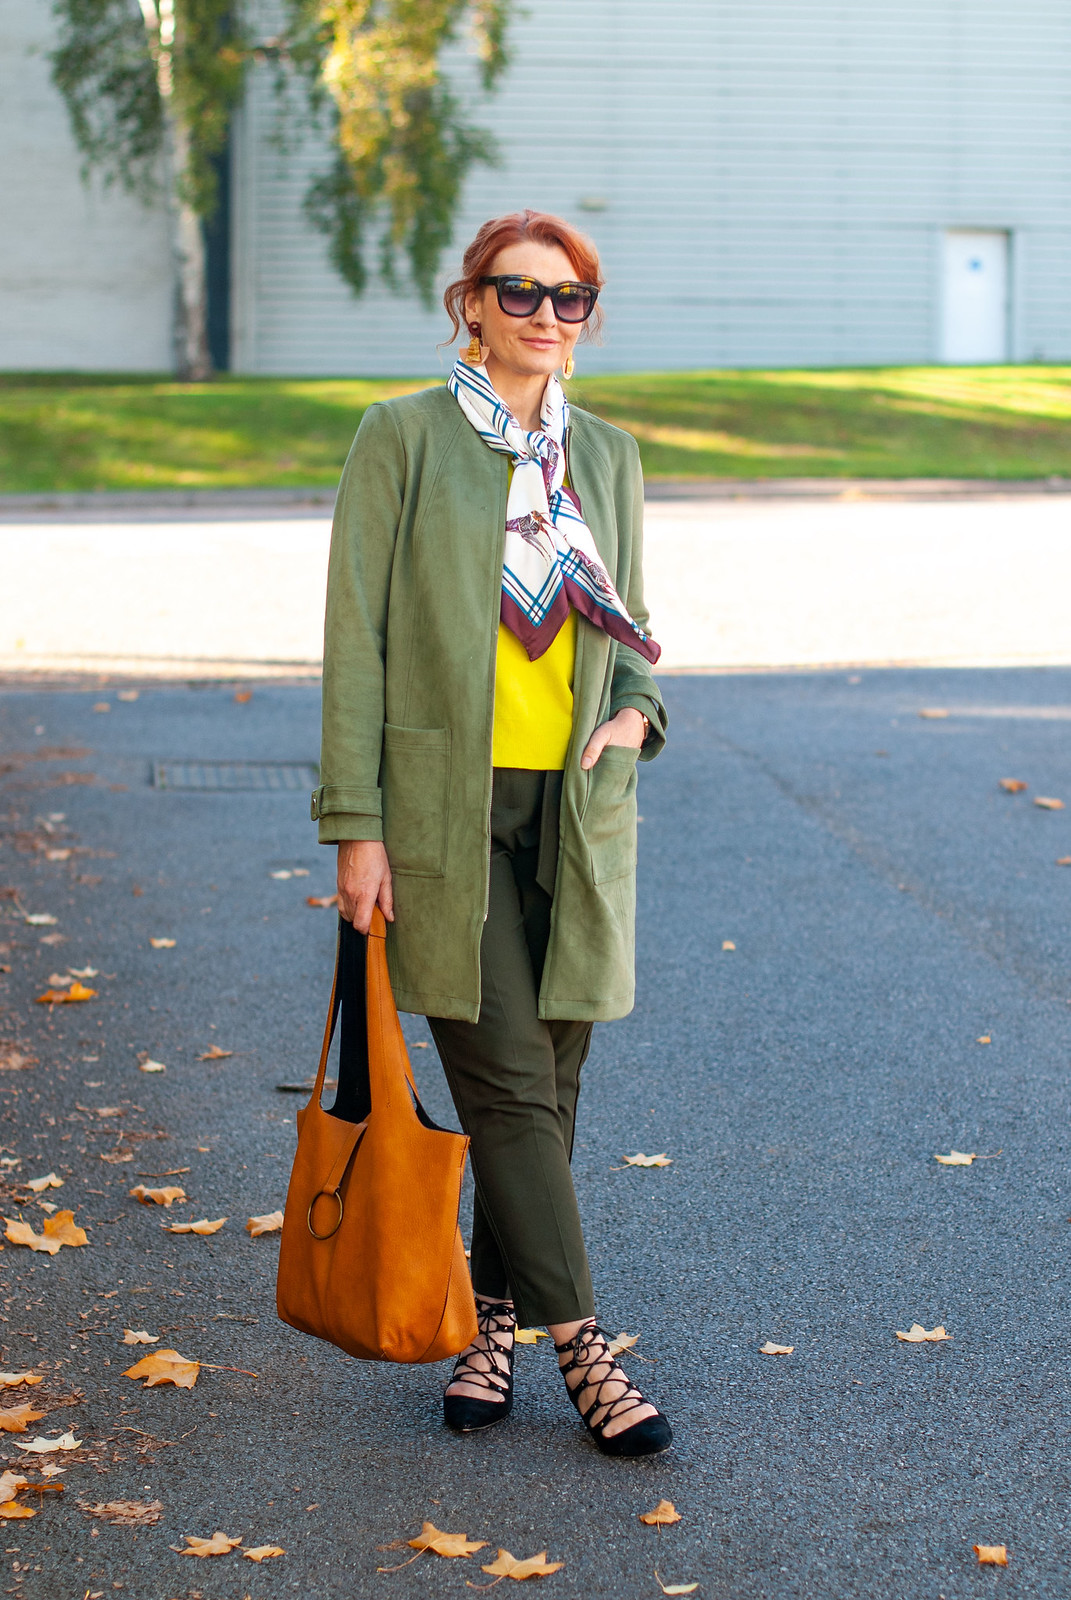 Pin by evelyne JAMART on Hermes  Outfits, Minimalist fashion, Cool outfits